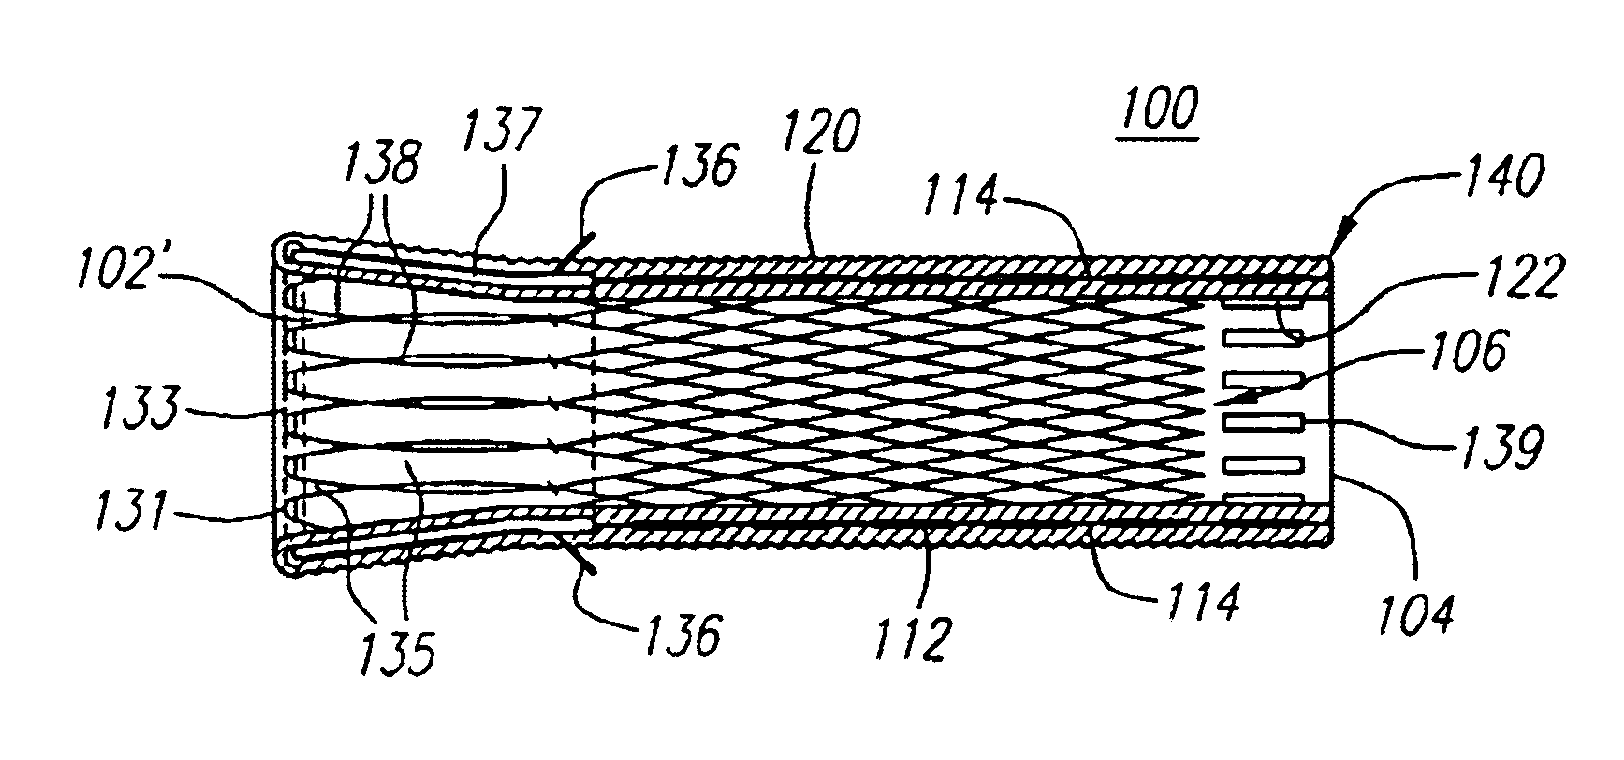 Textured and drug eluting coronary artery stent